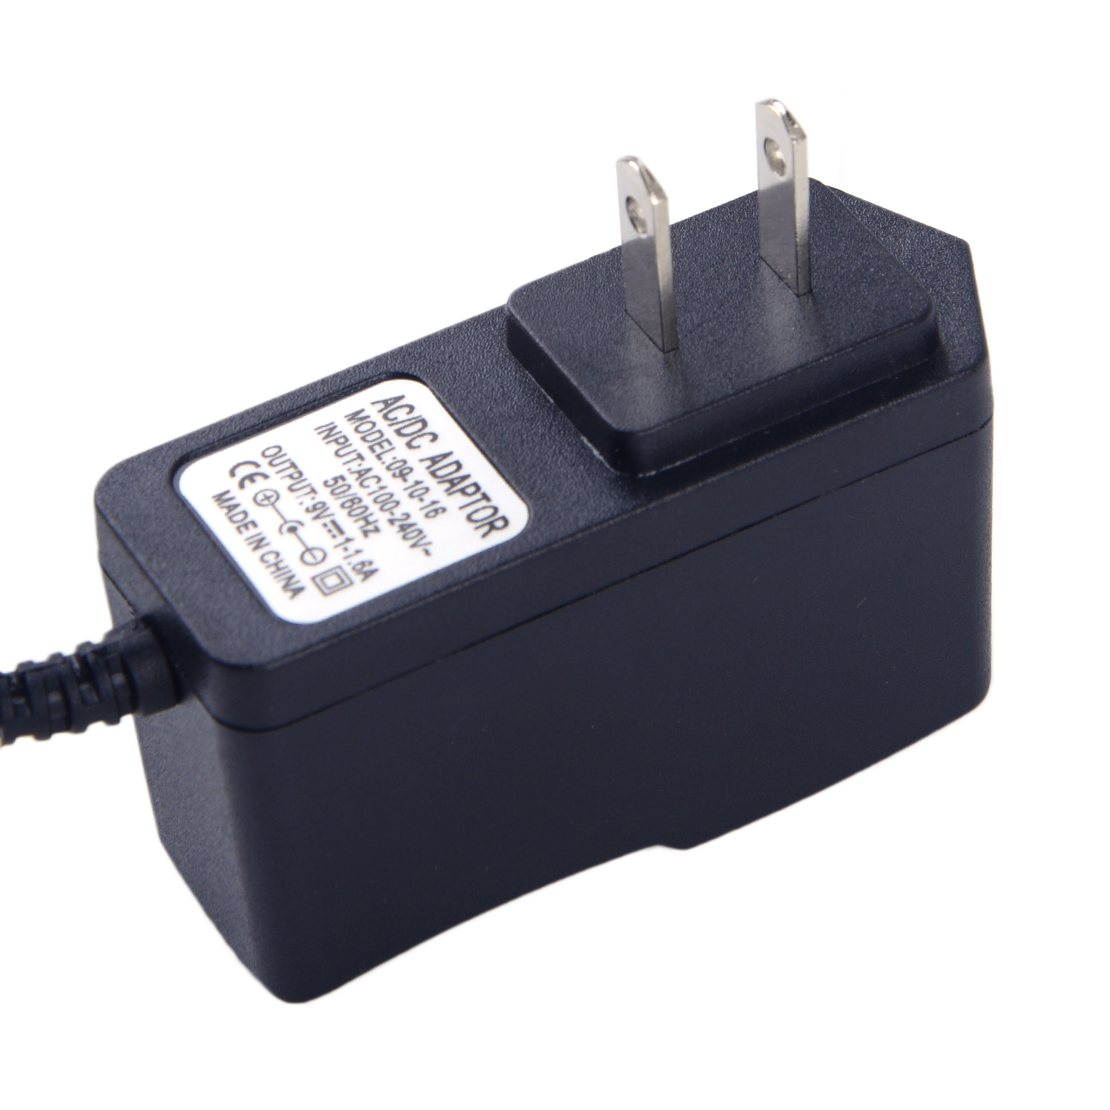 Charger Power Supply AC Adapter Fit for Brother P-Touch PT-E100 PT-D200 ...